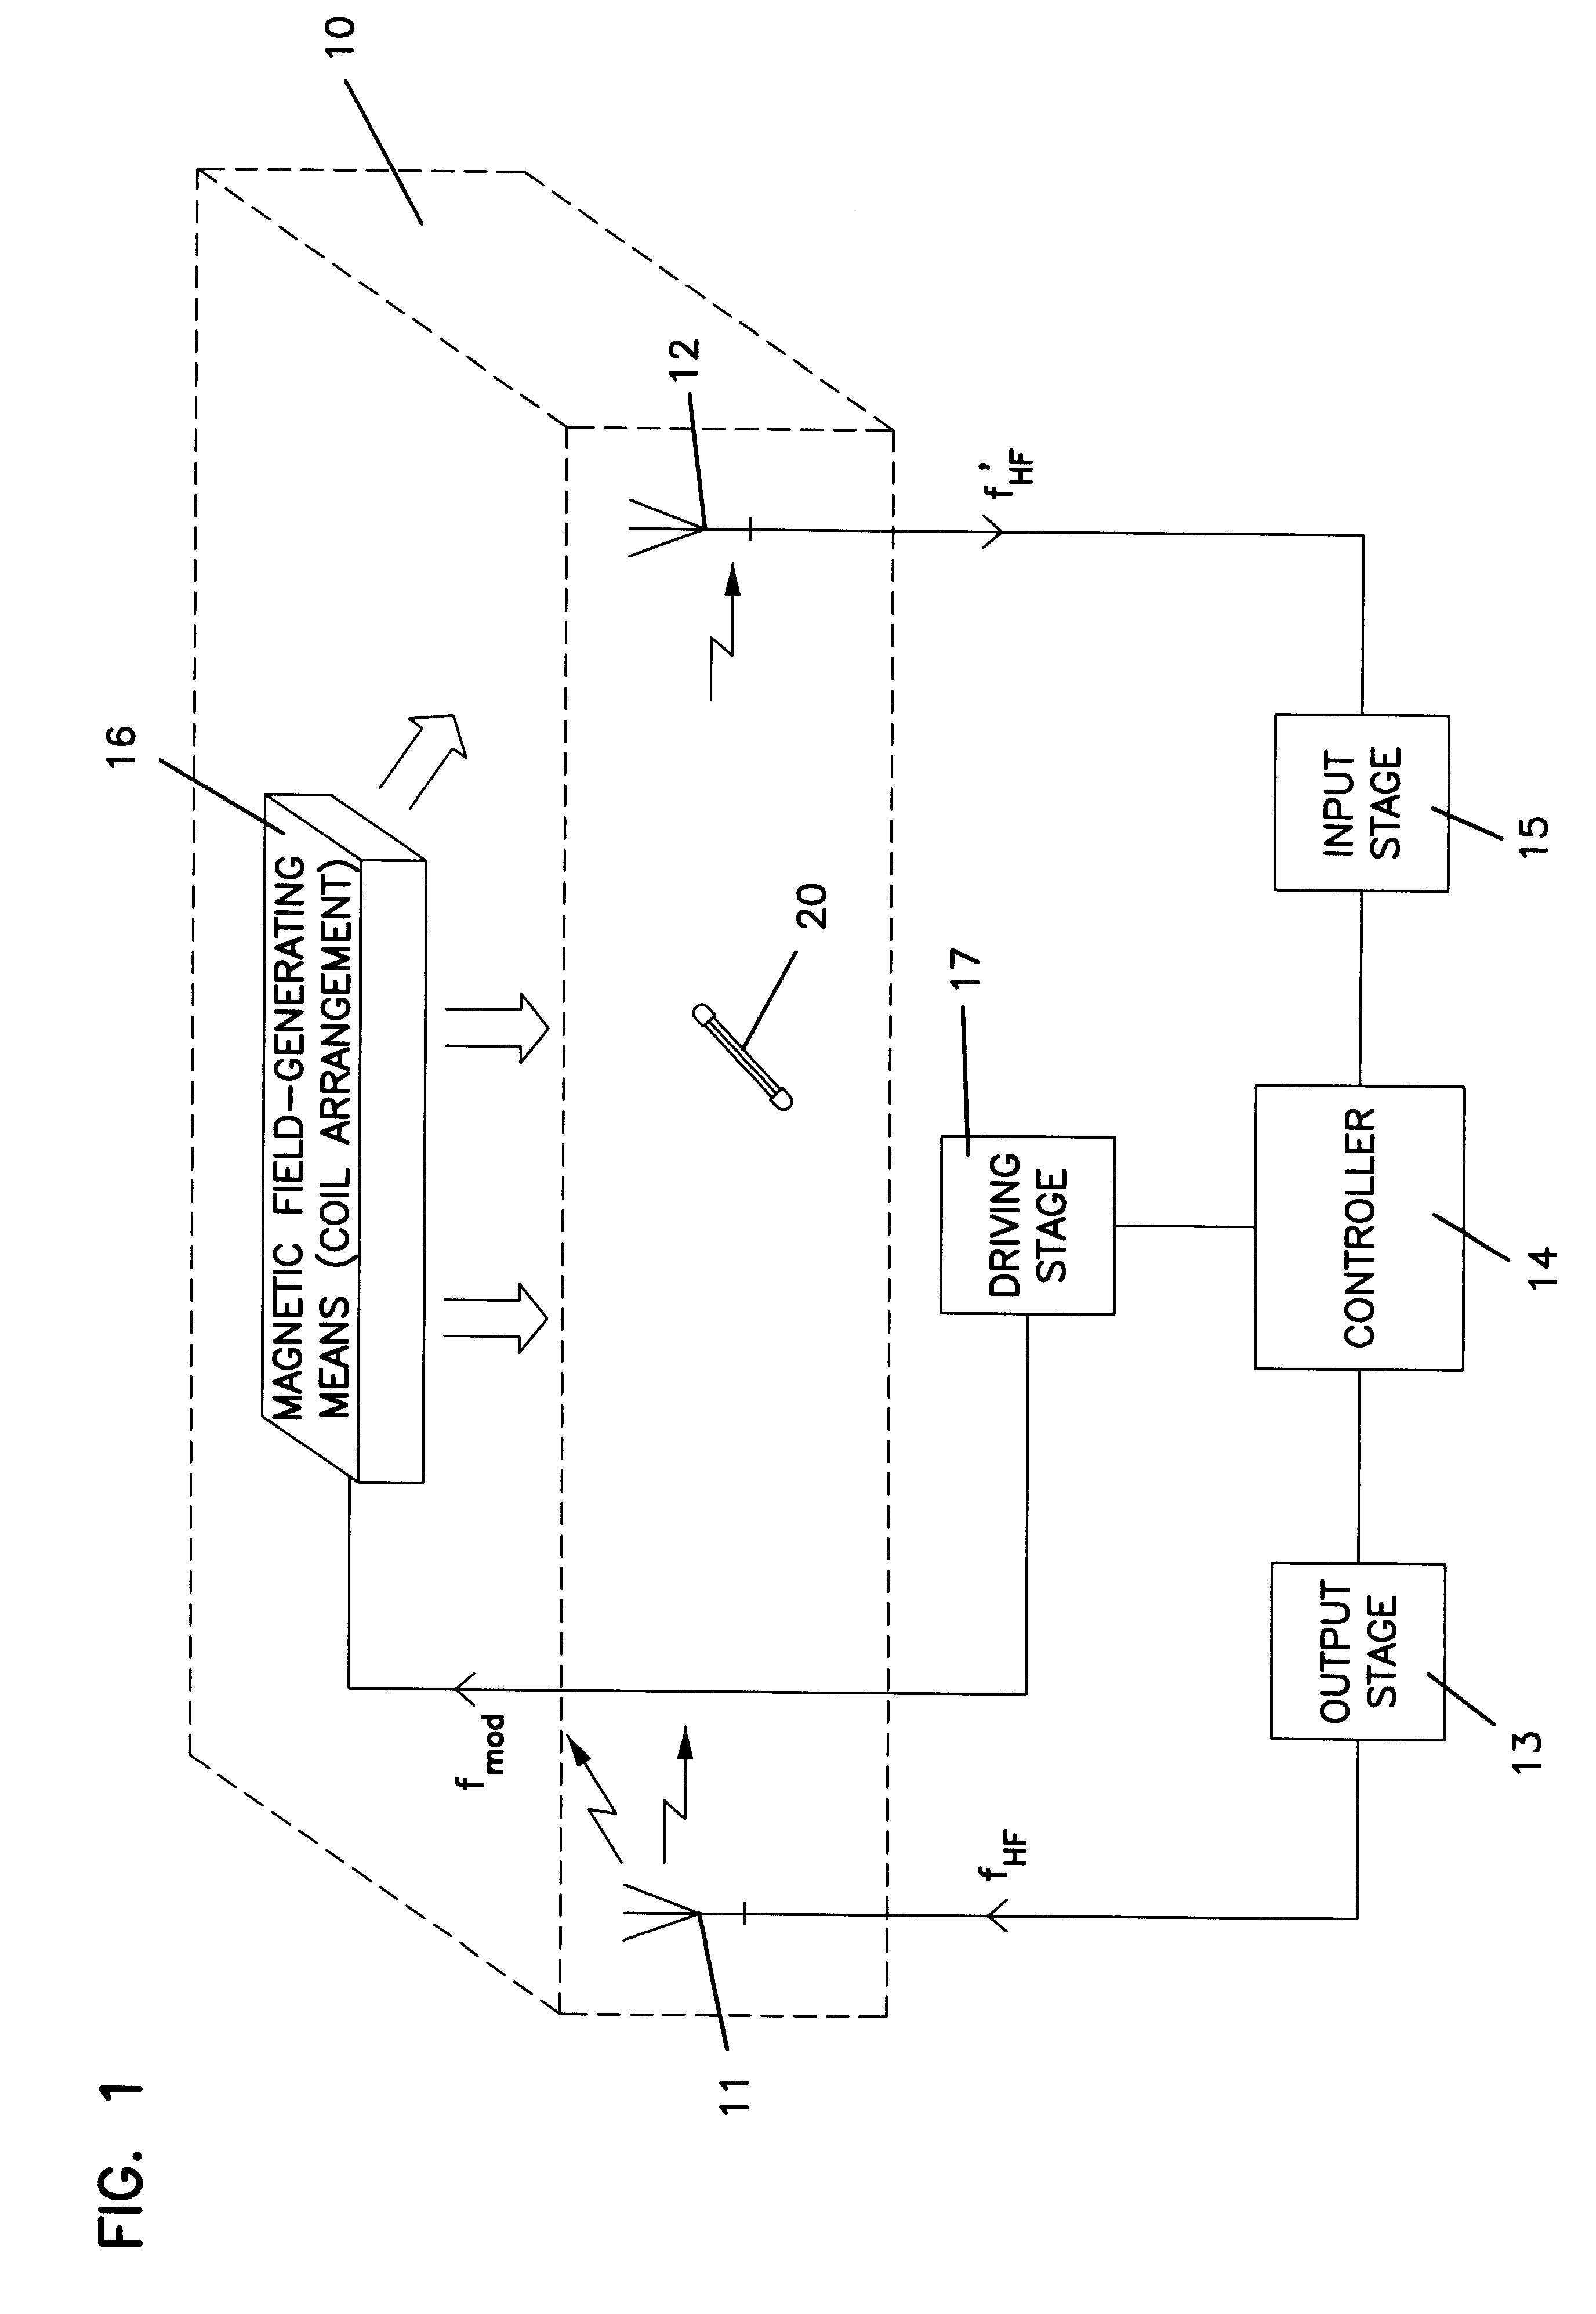 Sensor for remote detection of objects